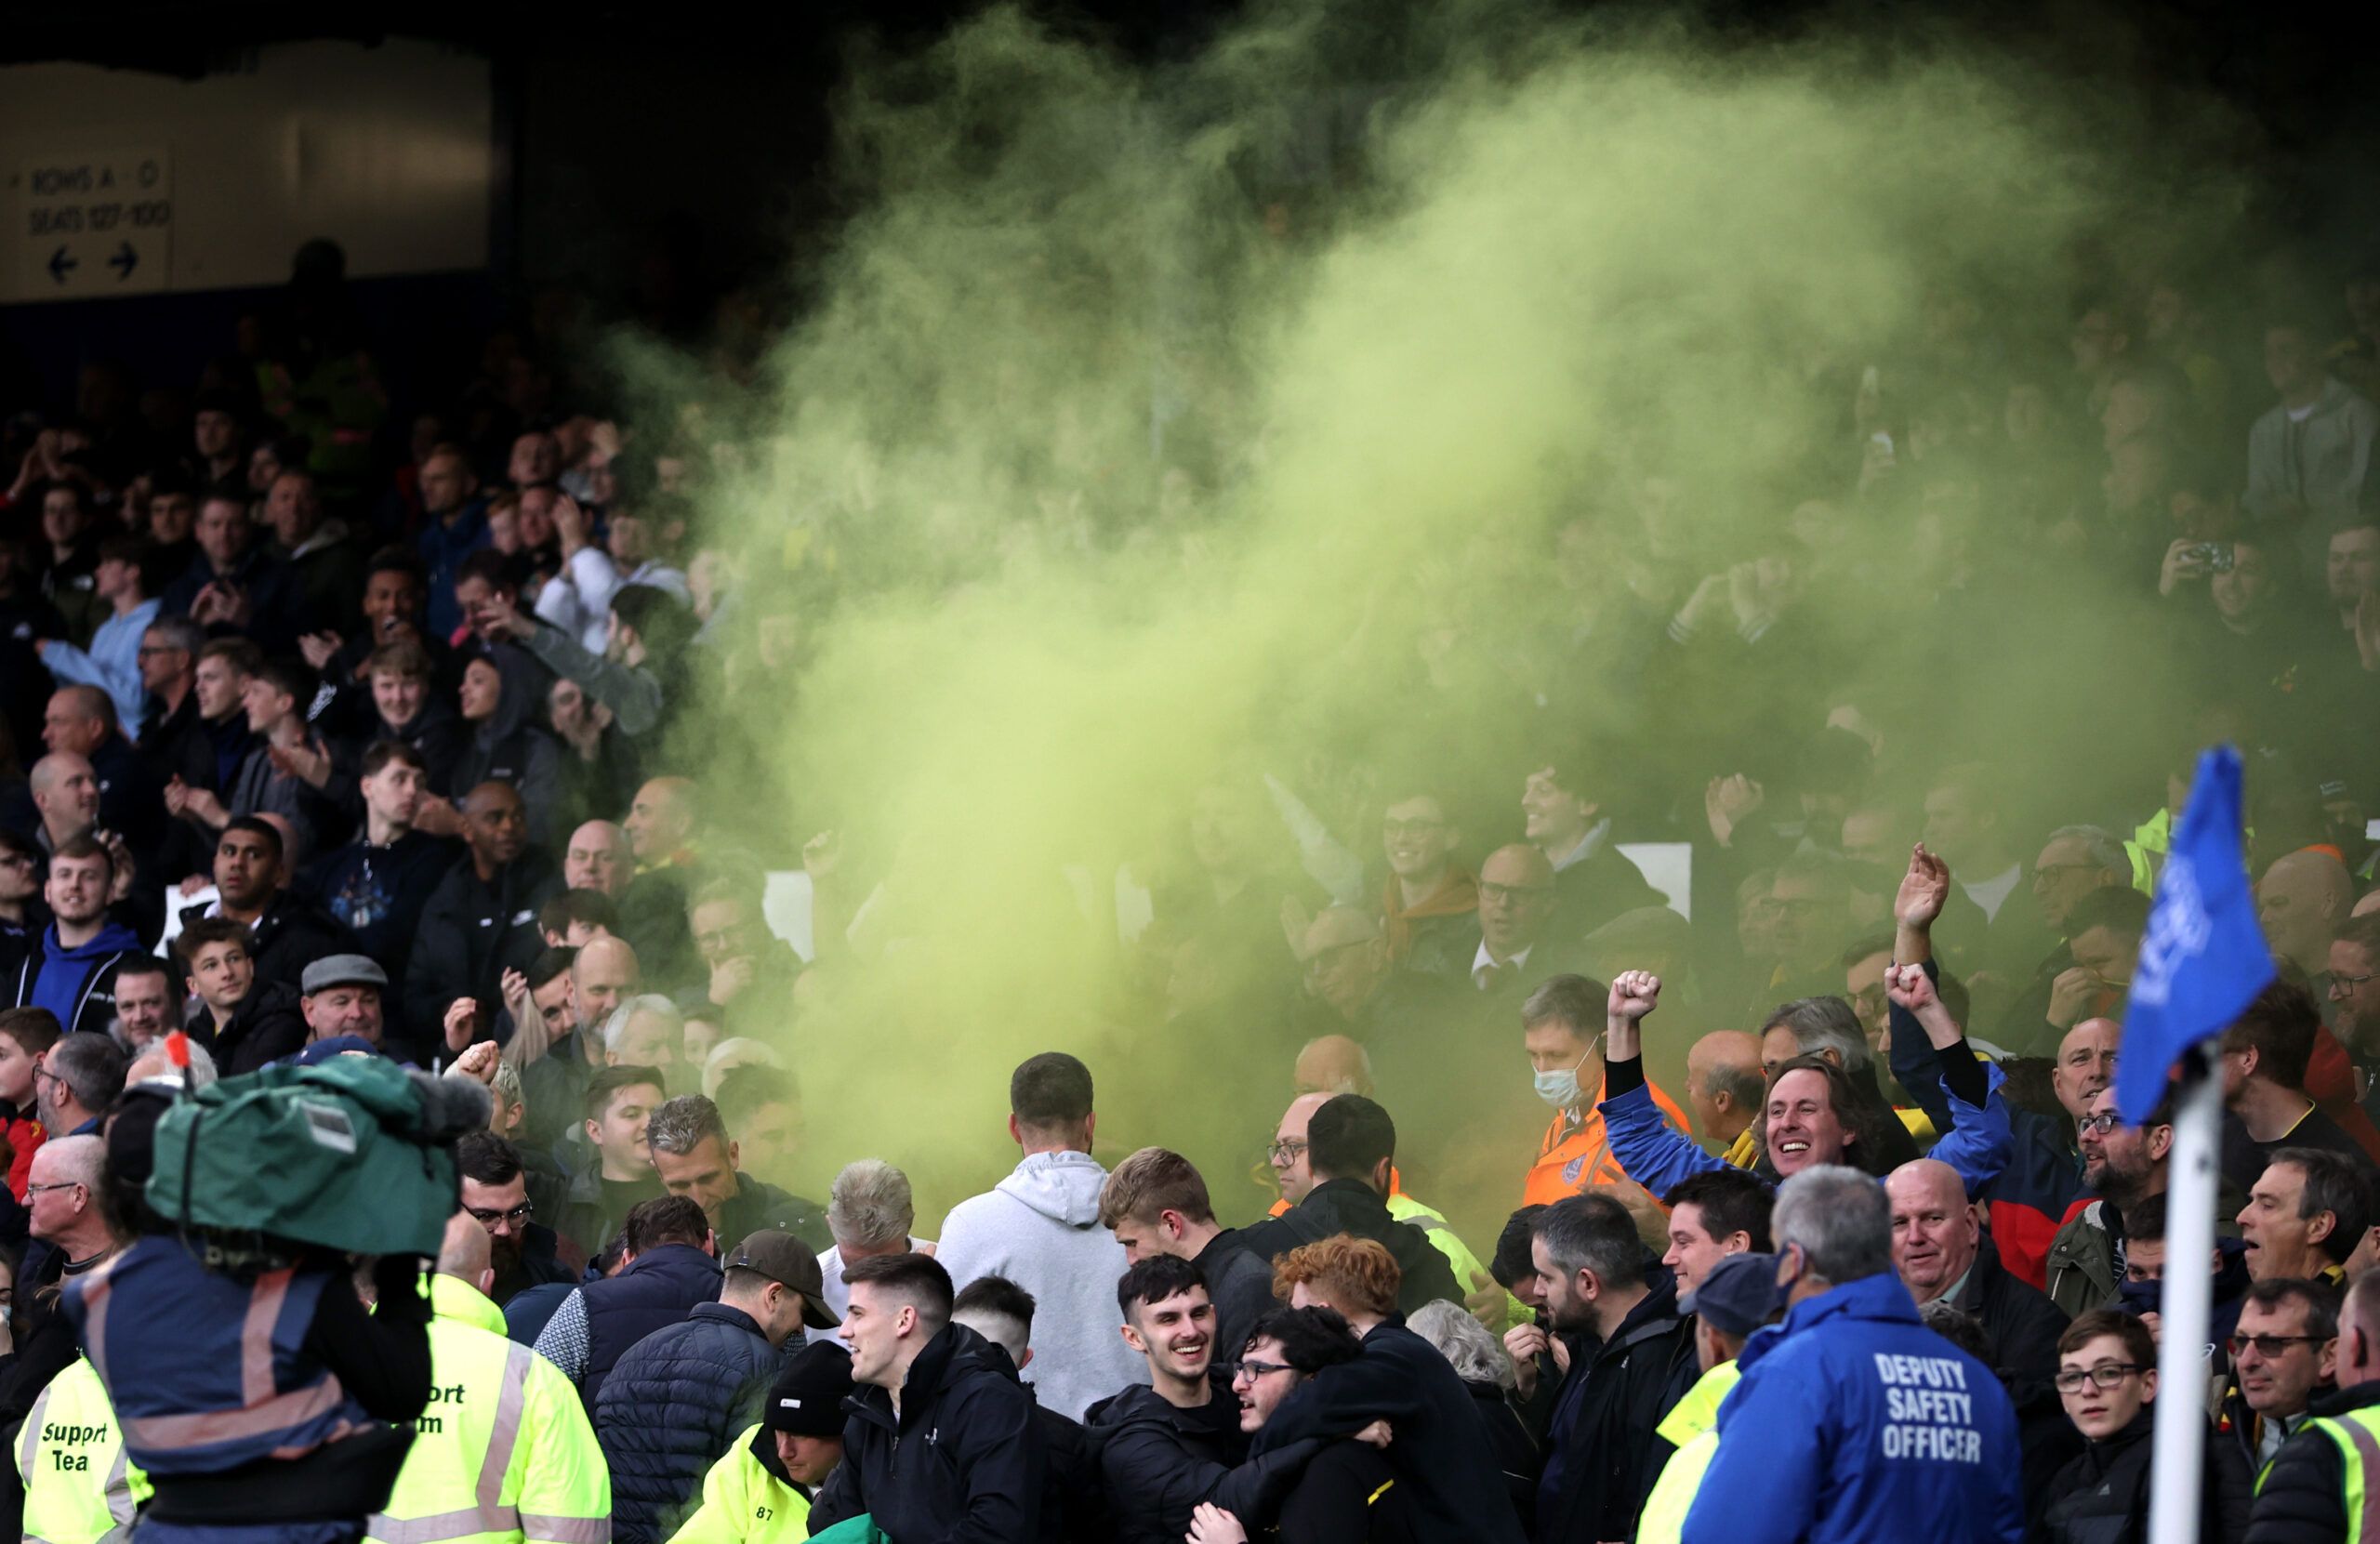 Soccer - England - Premier League - Everton v Watford - Goodison Park, Liverpool, Britain - October 23, 2021 Watford fans with a flare inside the stadium during the match Action Images via Reuters/Molly Darlington EDITORIAL USE ONLY. No use with unauthorized audio, video, data, fixture lists, club/league logos or 'live' services. Online in-match use limited to 75 images, no video emulation. No use in betting, games or single club /league/player publications.  Please contact your account represen